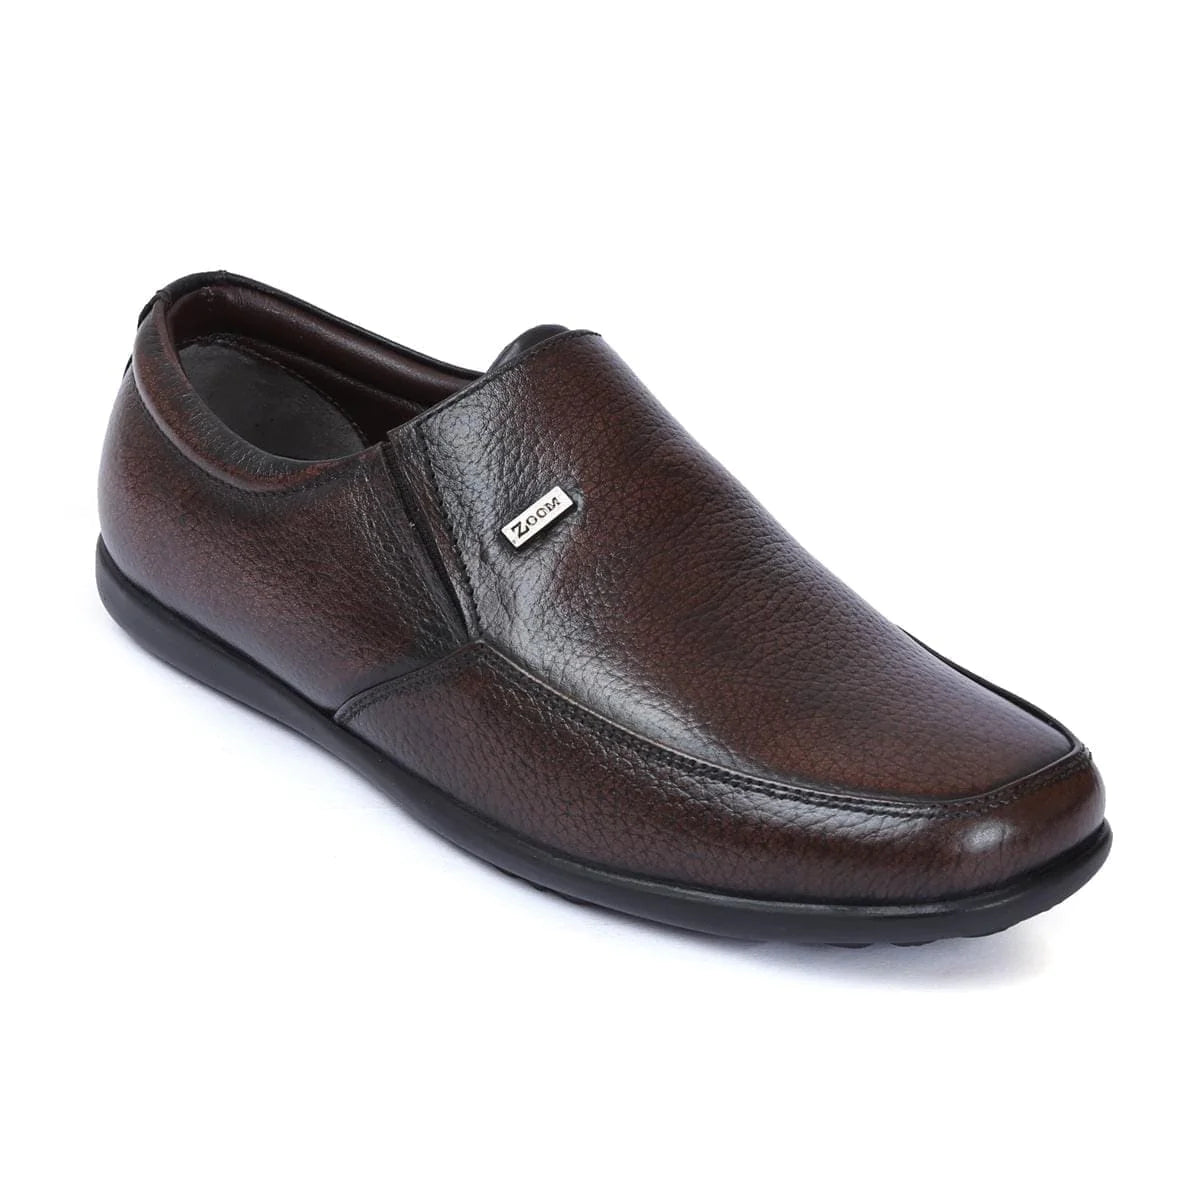 Buy Men's Leather Slip On Loafers D – 1321 Online – Zoom Shoes India